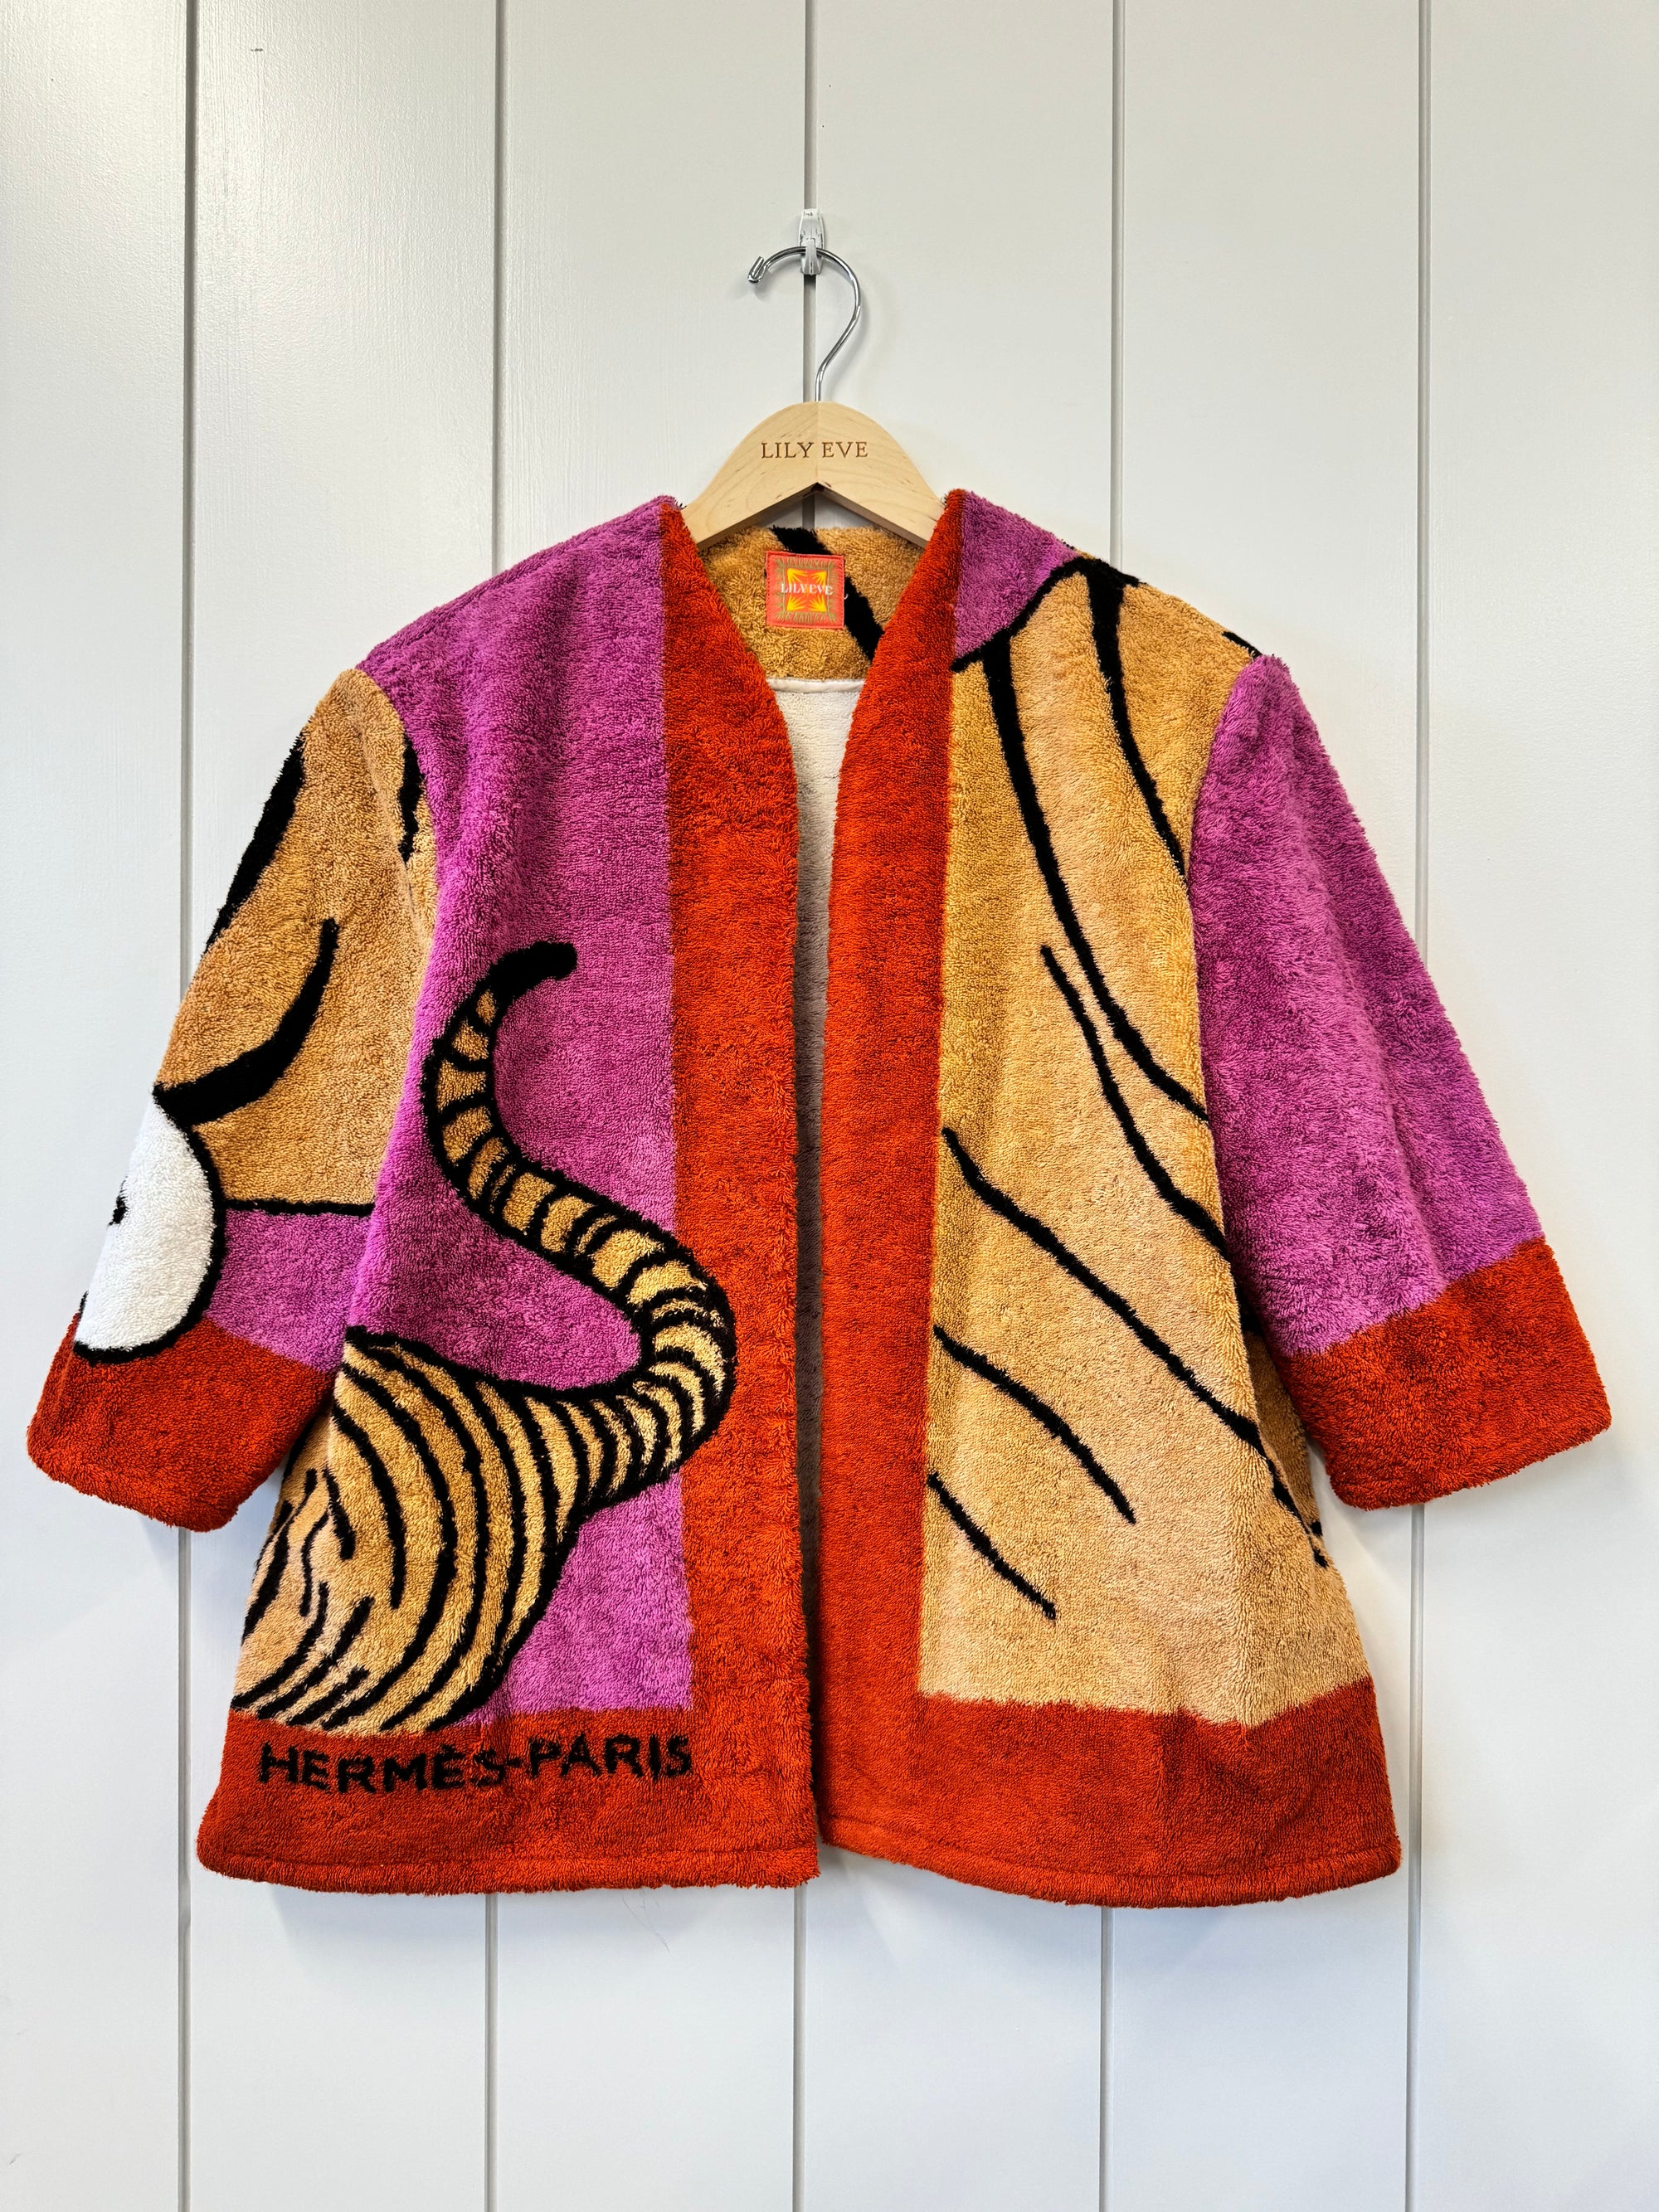 The Baby Tiger Jacket